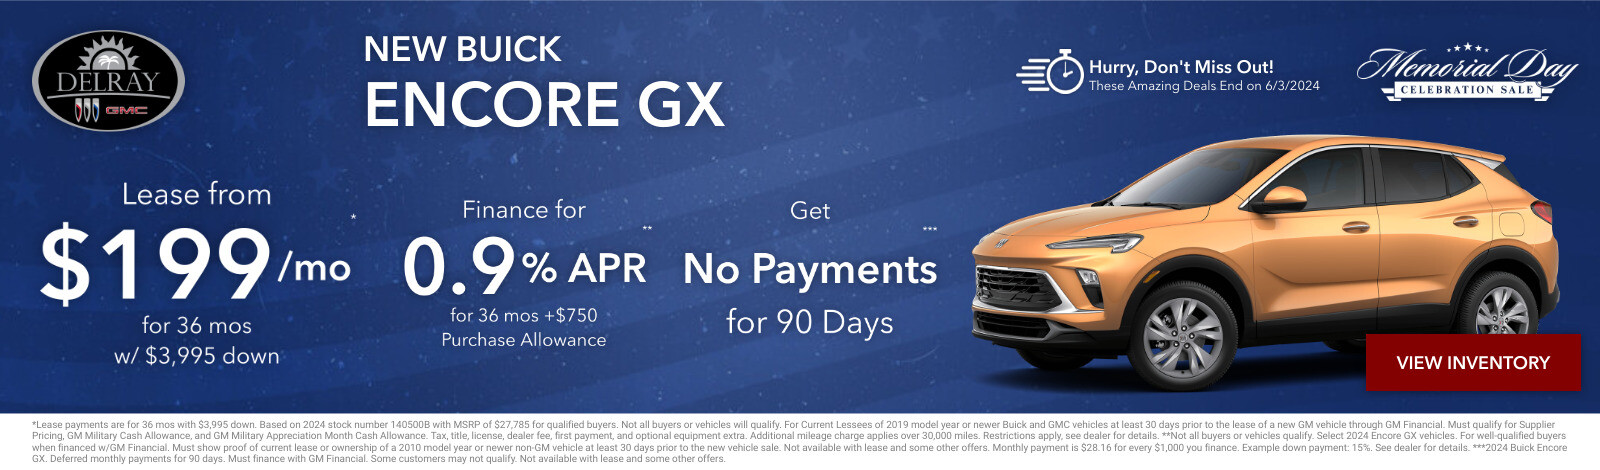 New Buick Encore GX Current Deals and Offers in Delray Beach, FL